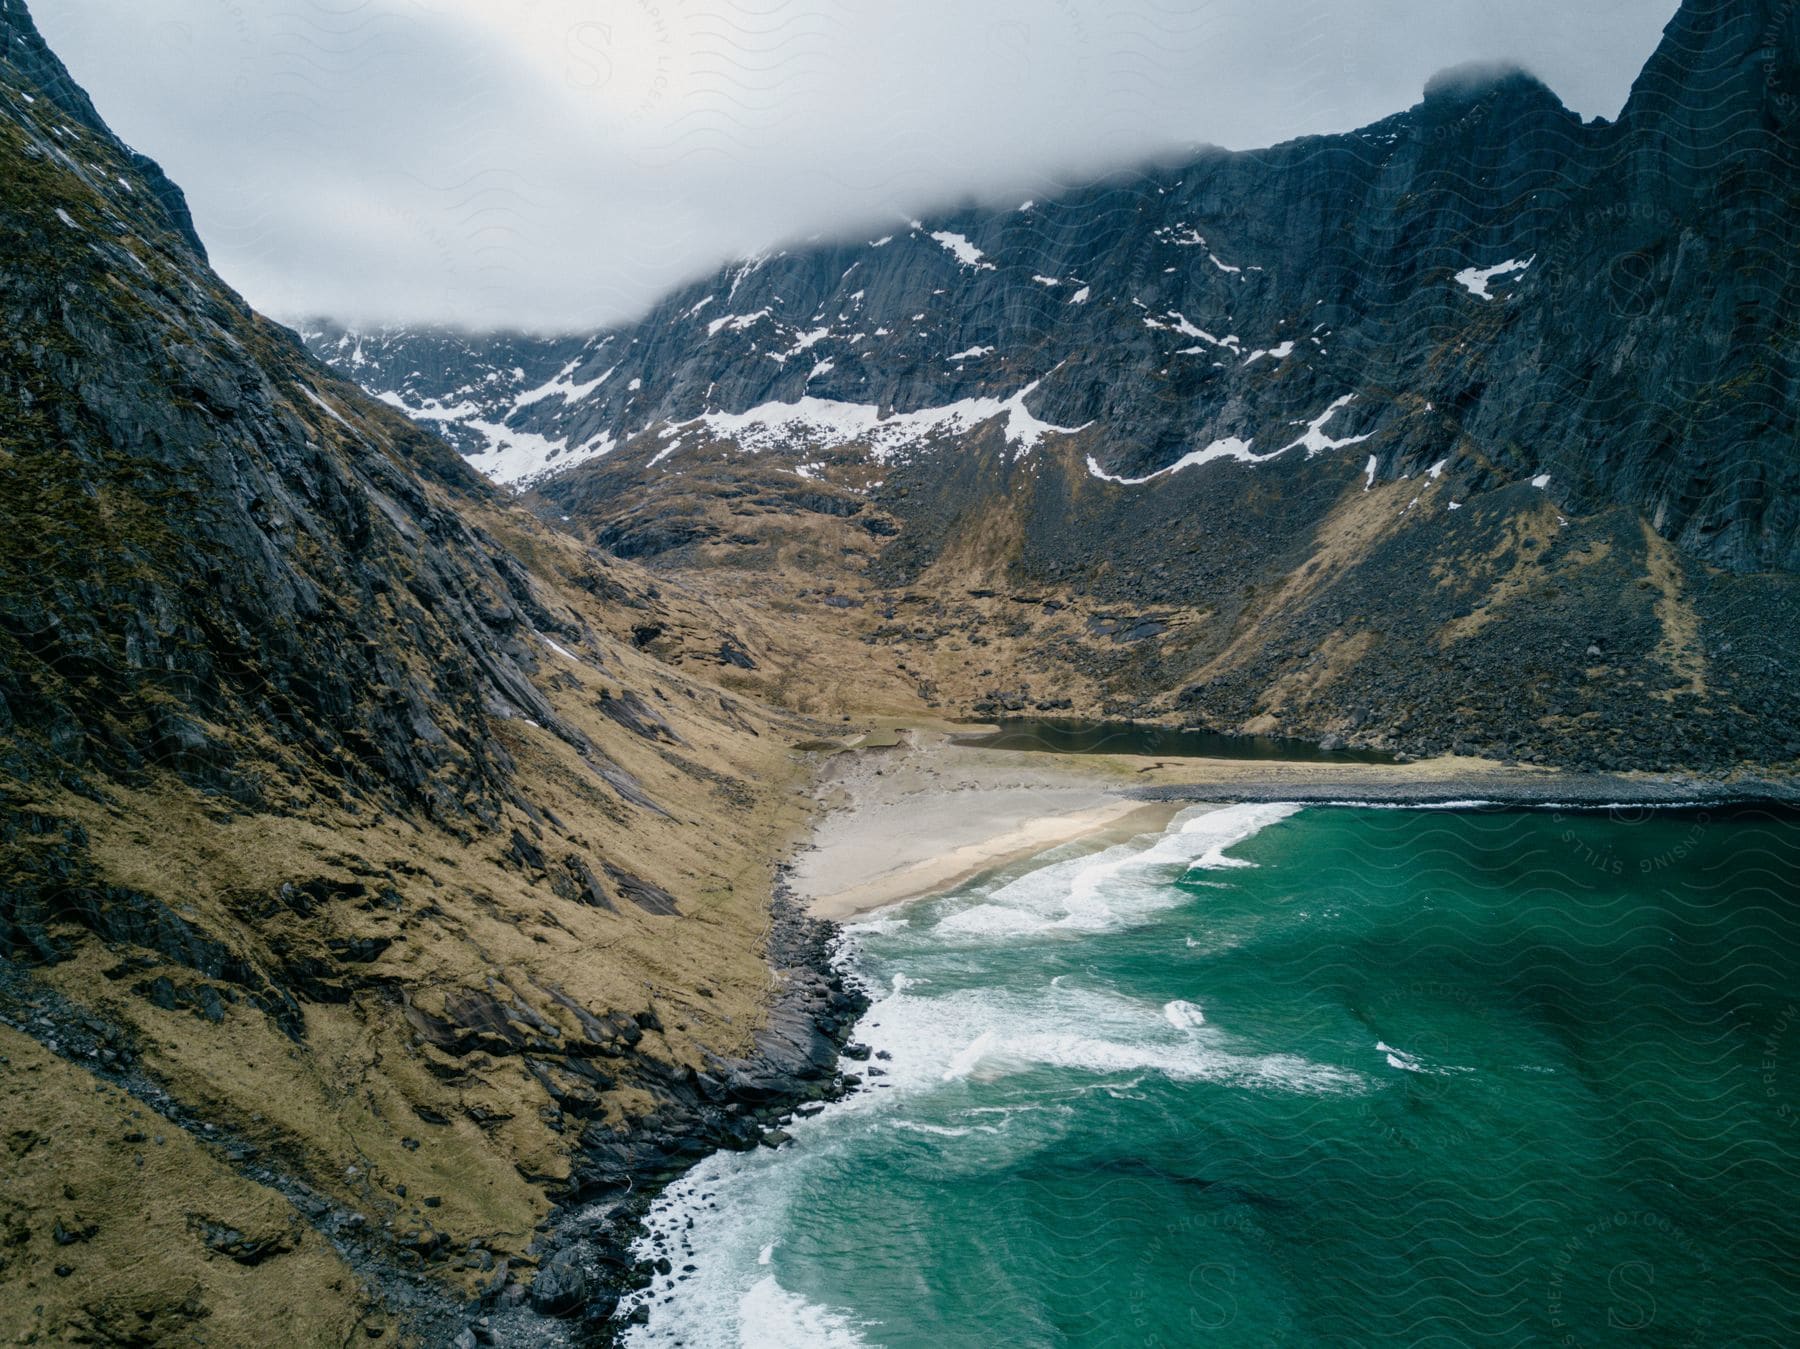 Waves crash on a small beach in a valley surrounded by mountains